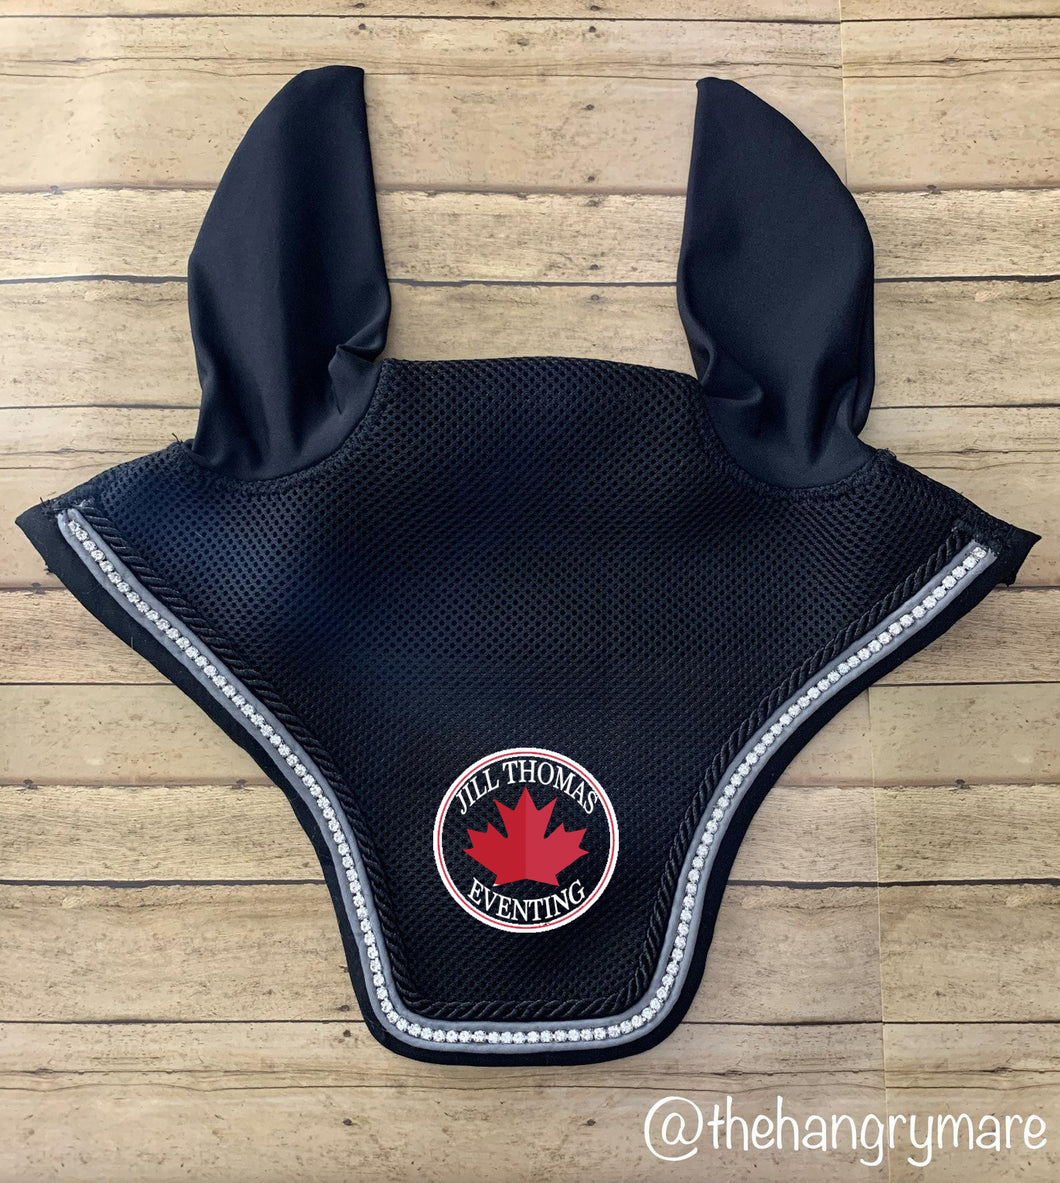 Jill Thomas Eventing- Custom Bonnet by The Hangry Mare